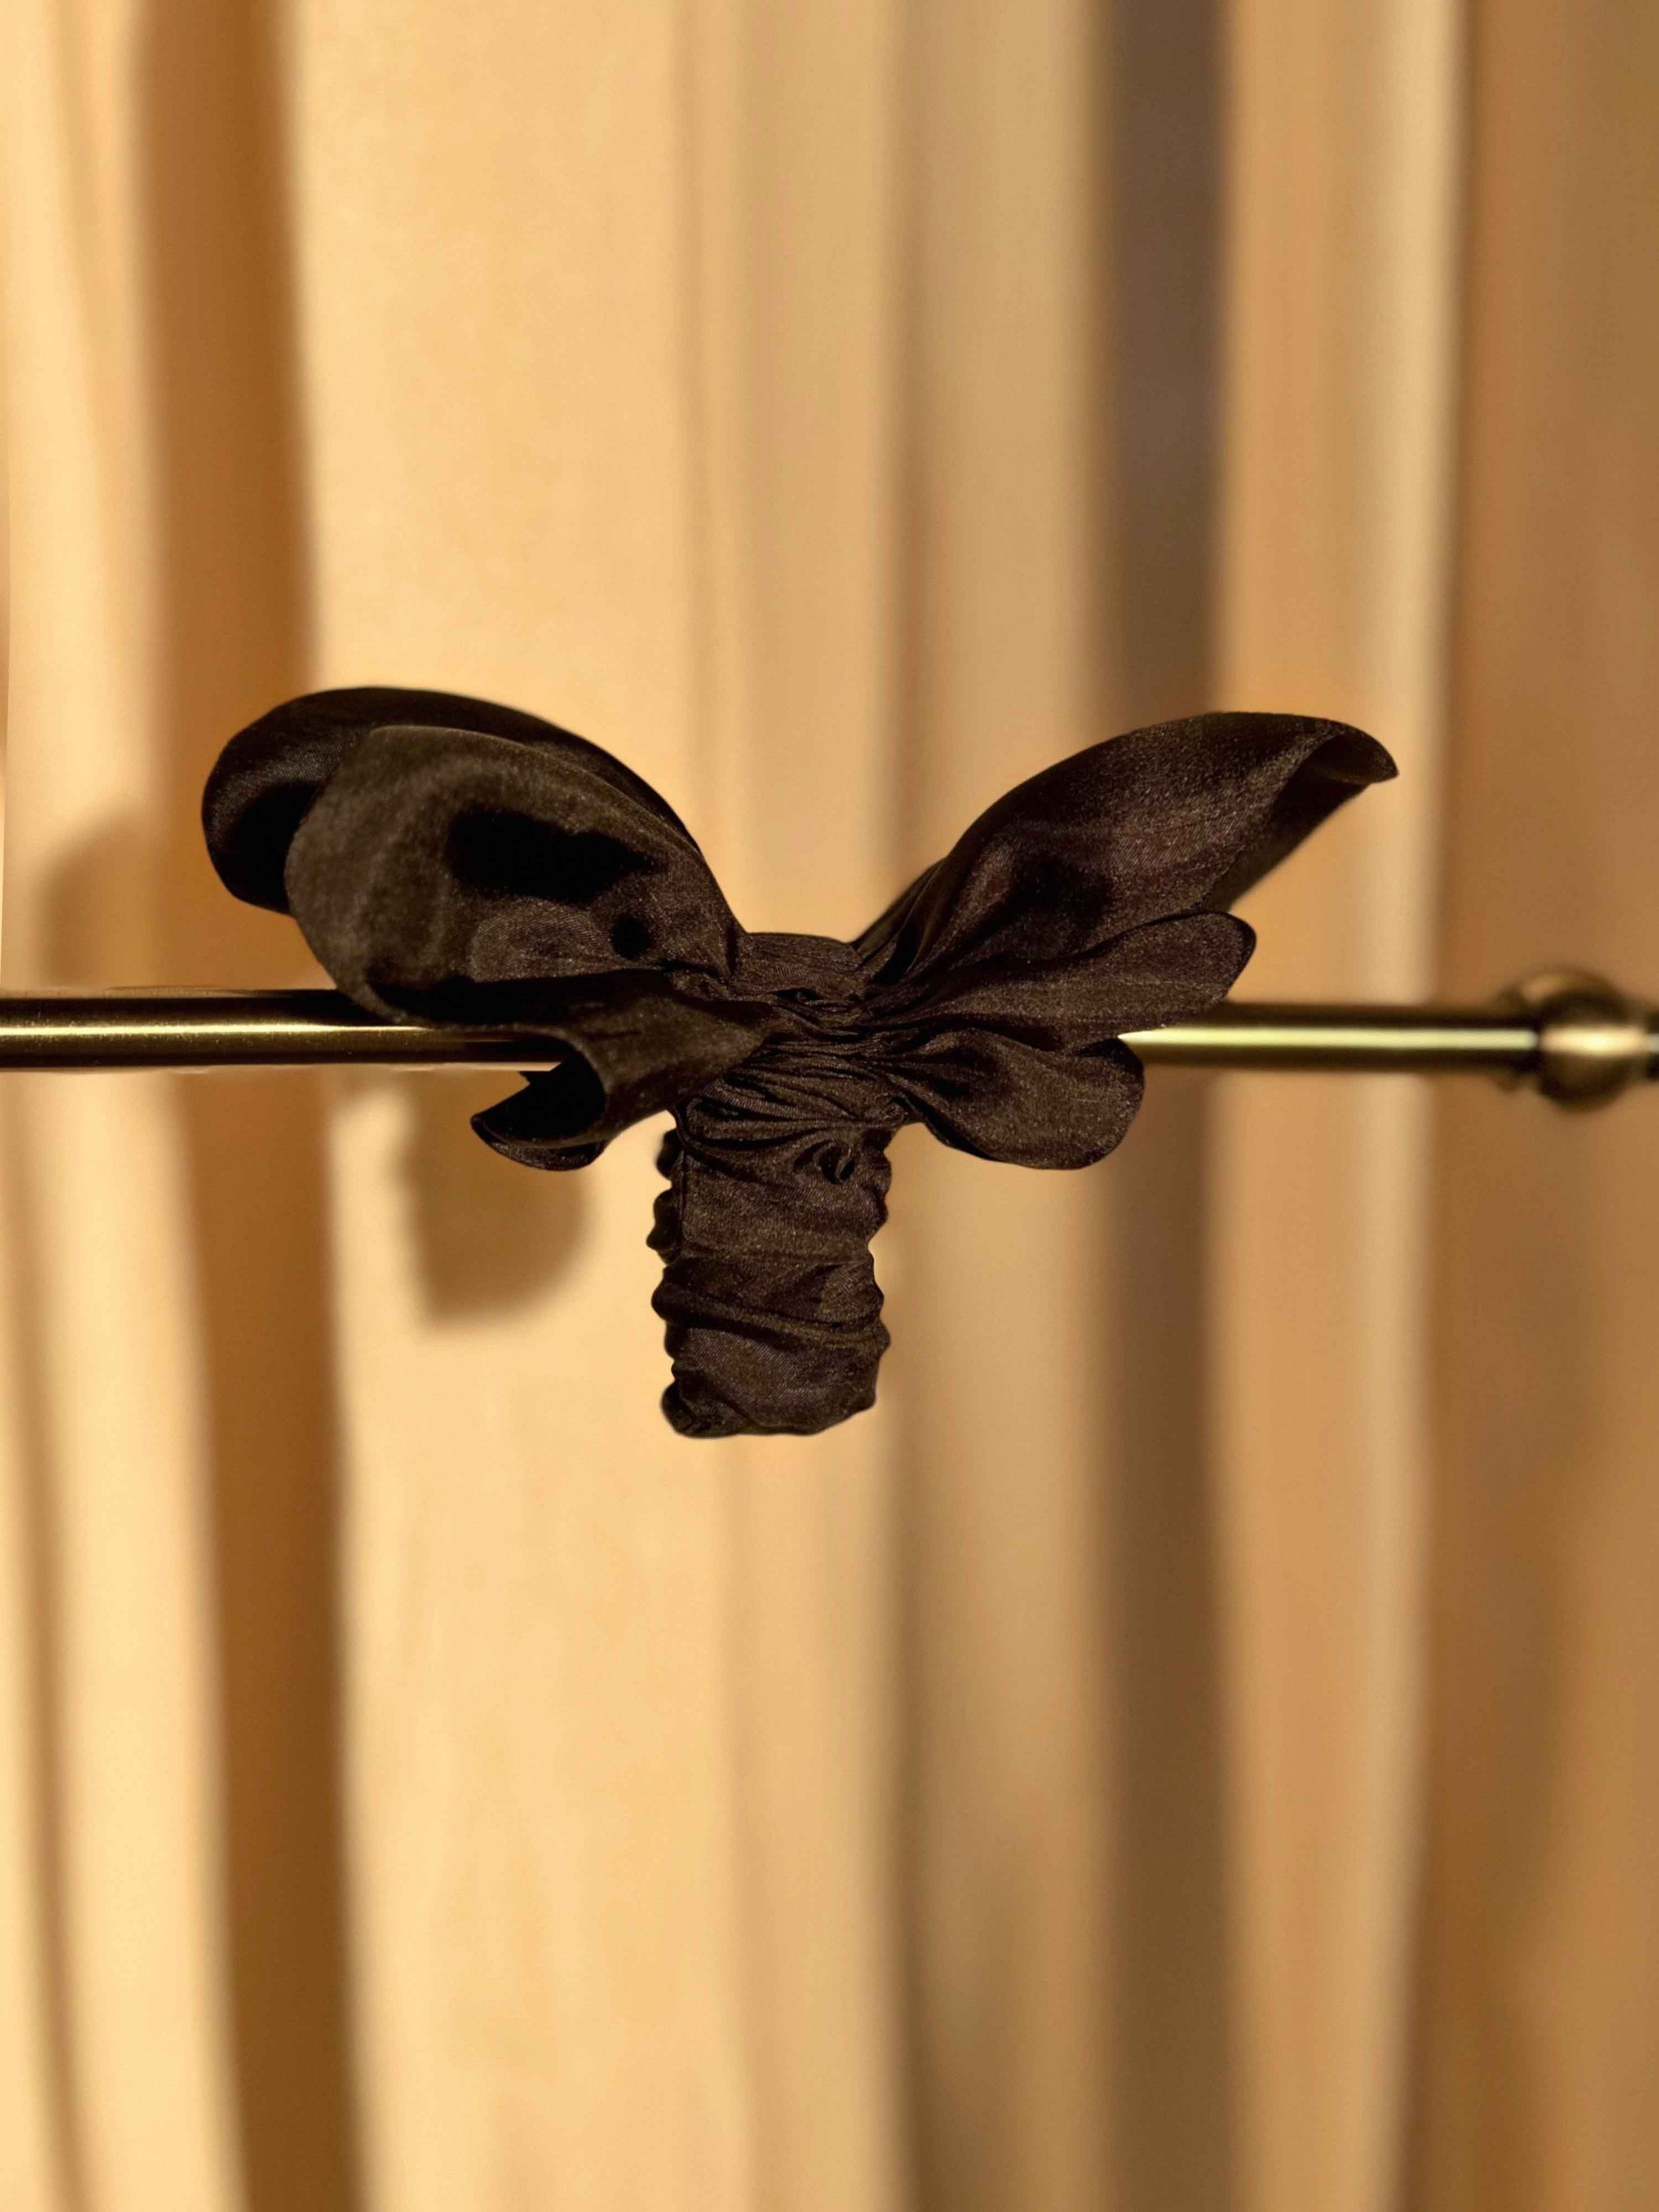 Double Ruffle Hair Accessory -black on stand.jpg